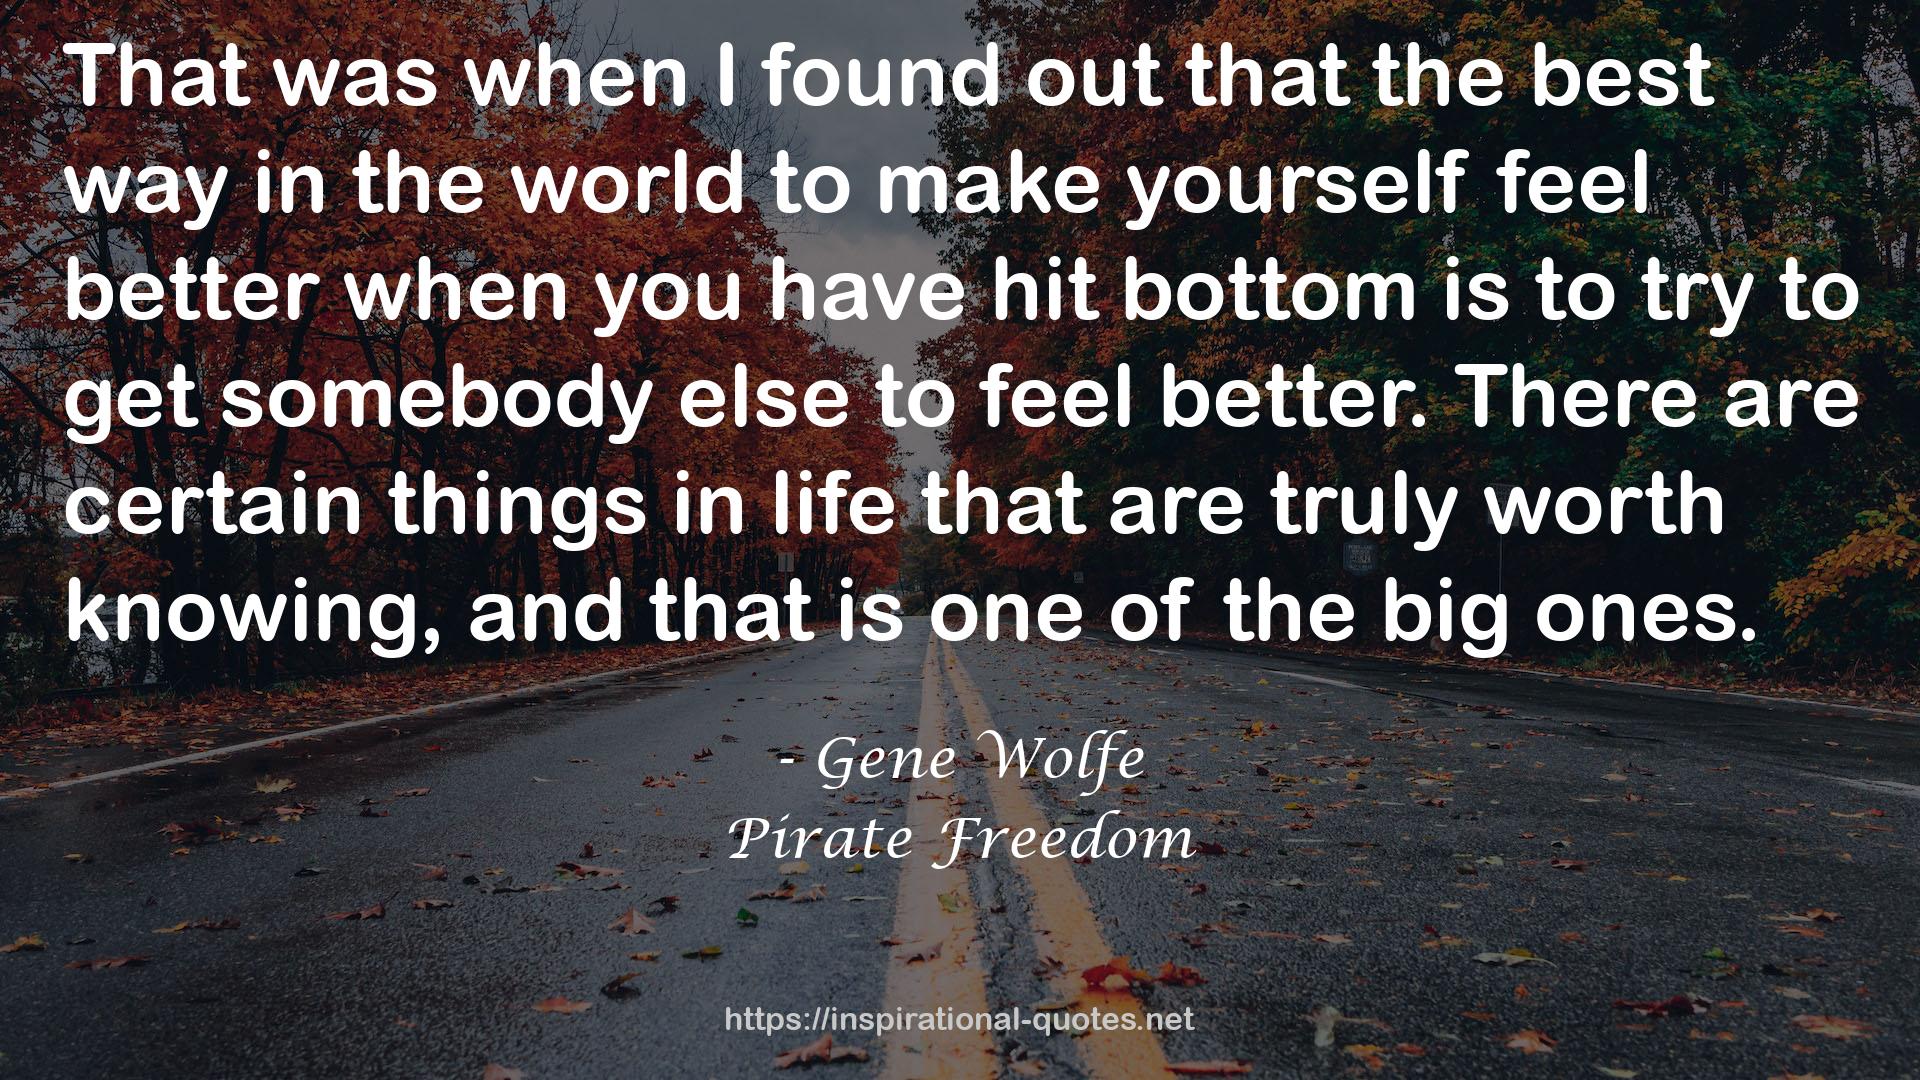 Pirate Freedom QUOTES